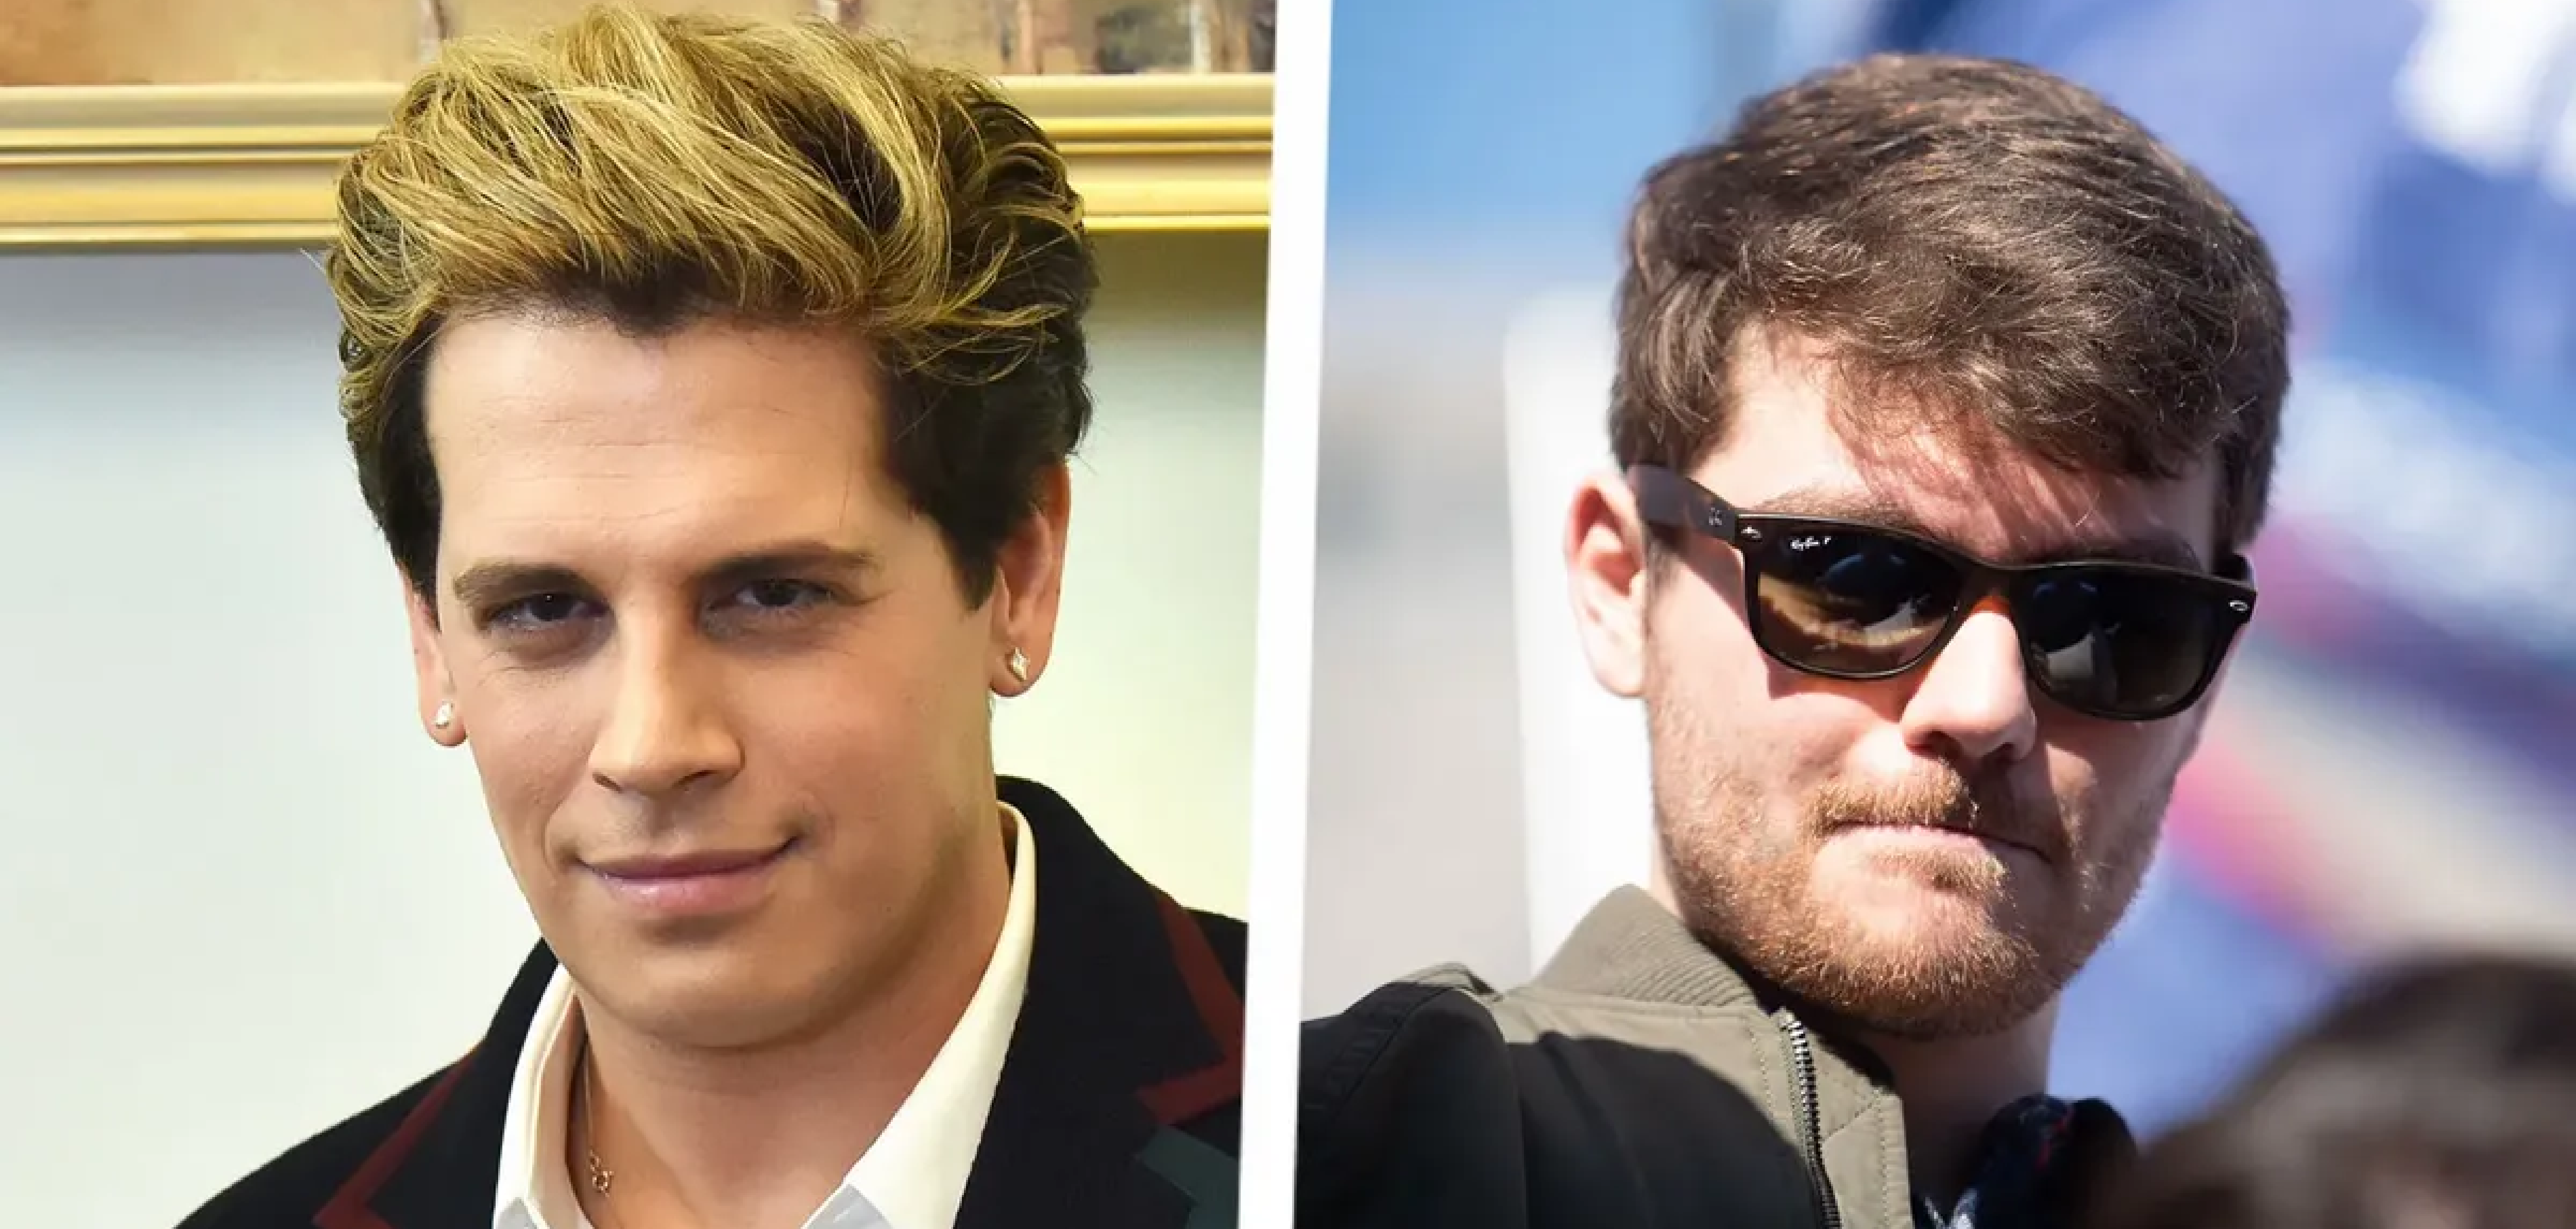 A split image of Milo Yiannopoulos and Nick Fuentes